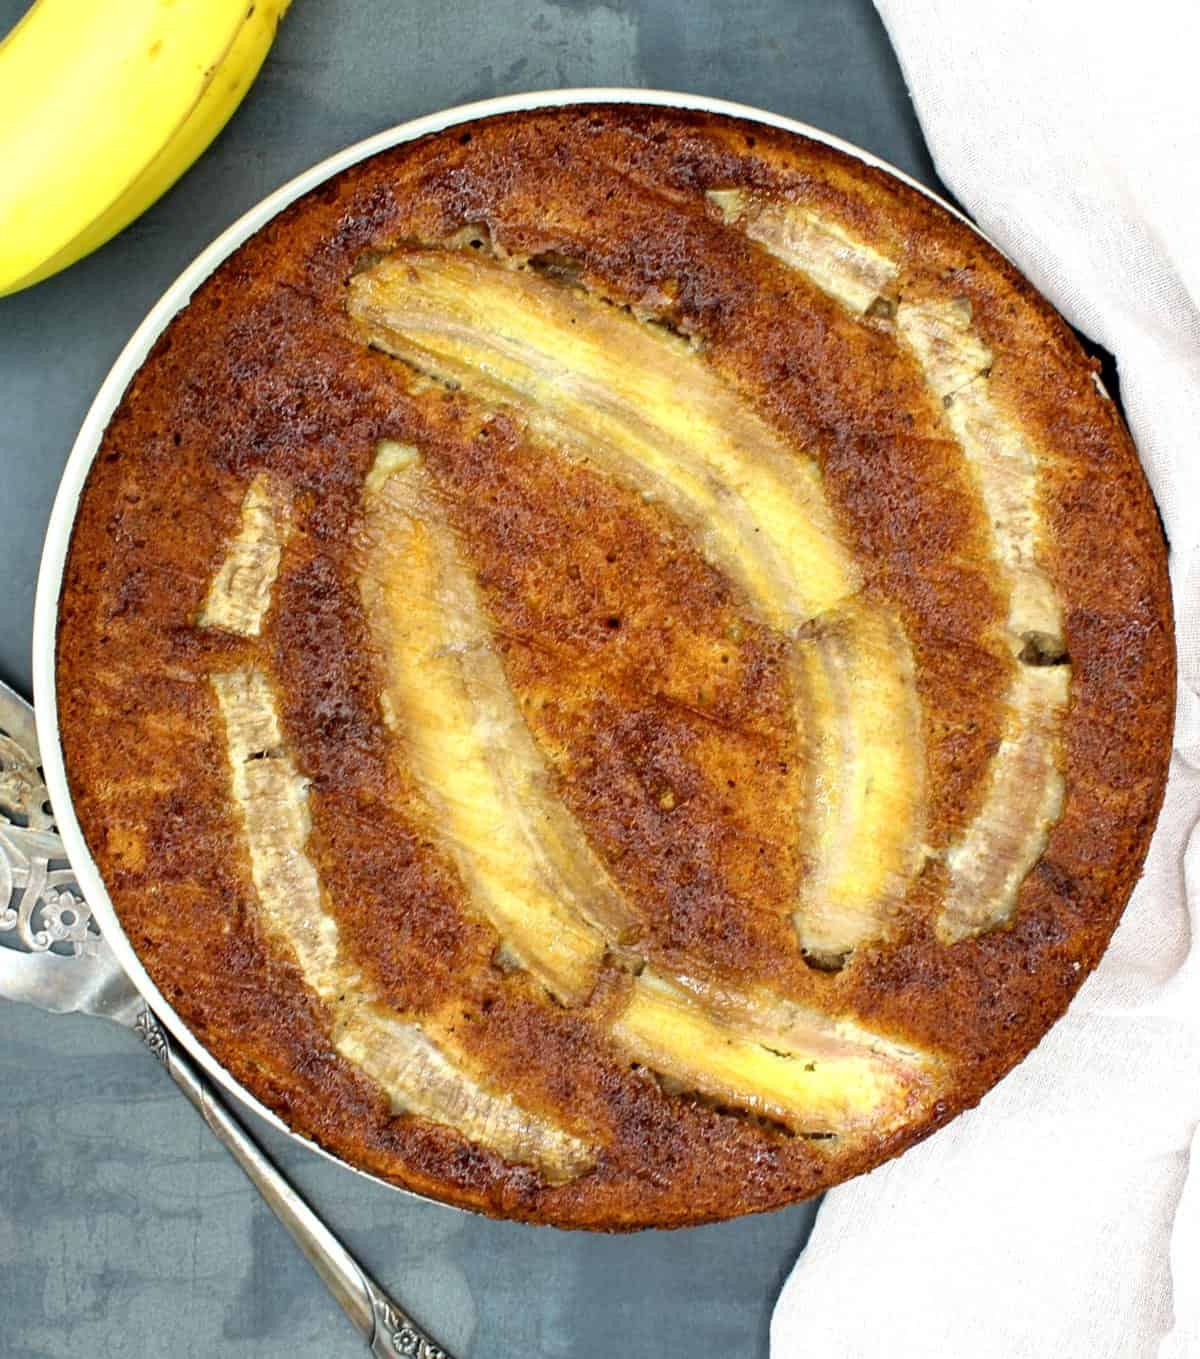 Vegan banana cake with banana in background, and a cake server.